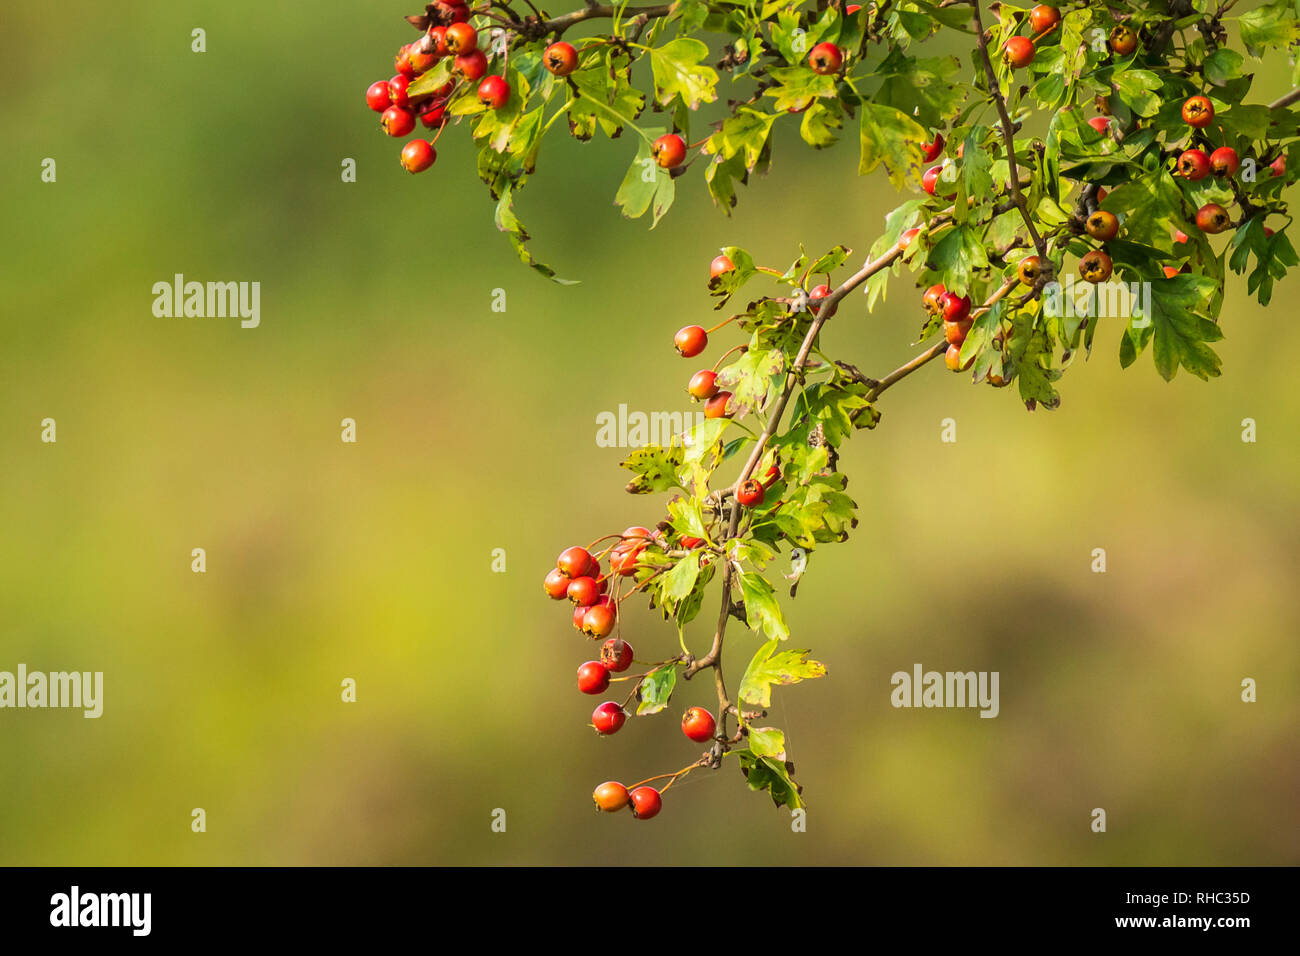 Orange fruit berries of a Sorbus aucuparia tree, commonly called rowan and mountain-ash. Blooming in bright sunlight during Autumn. Stock Photo